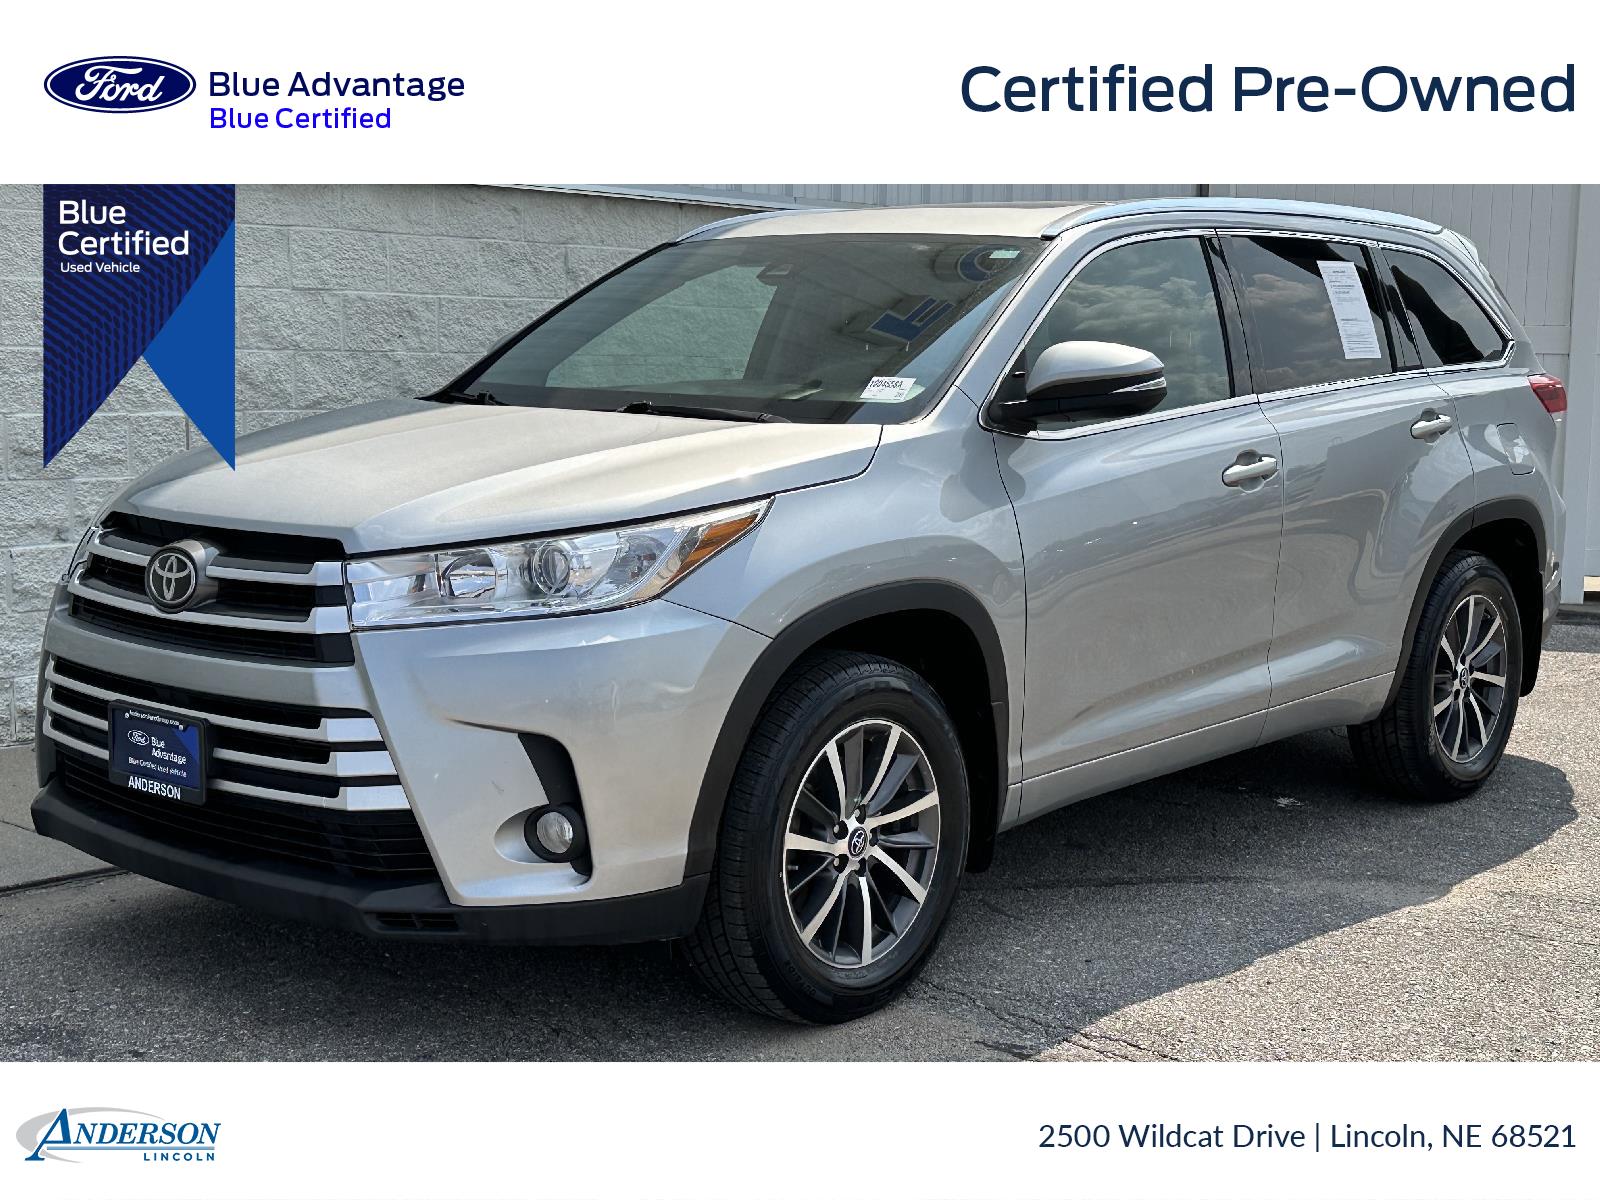 Used 2017 Toyota Highlander XLE Stock: 1004558A